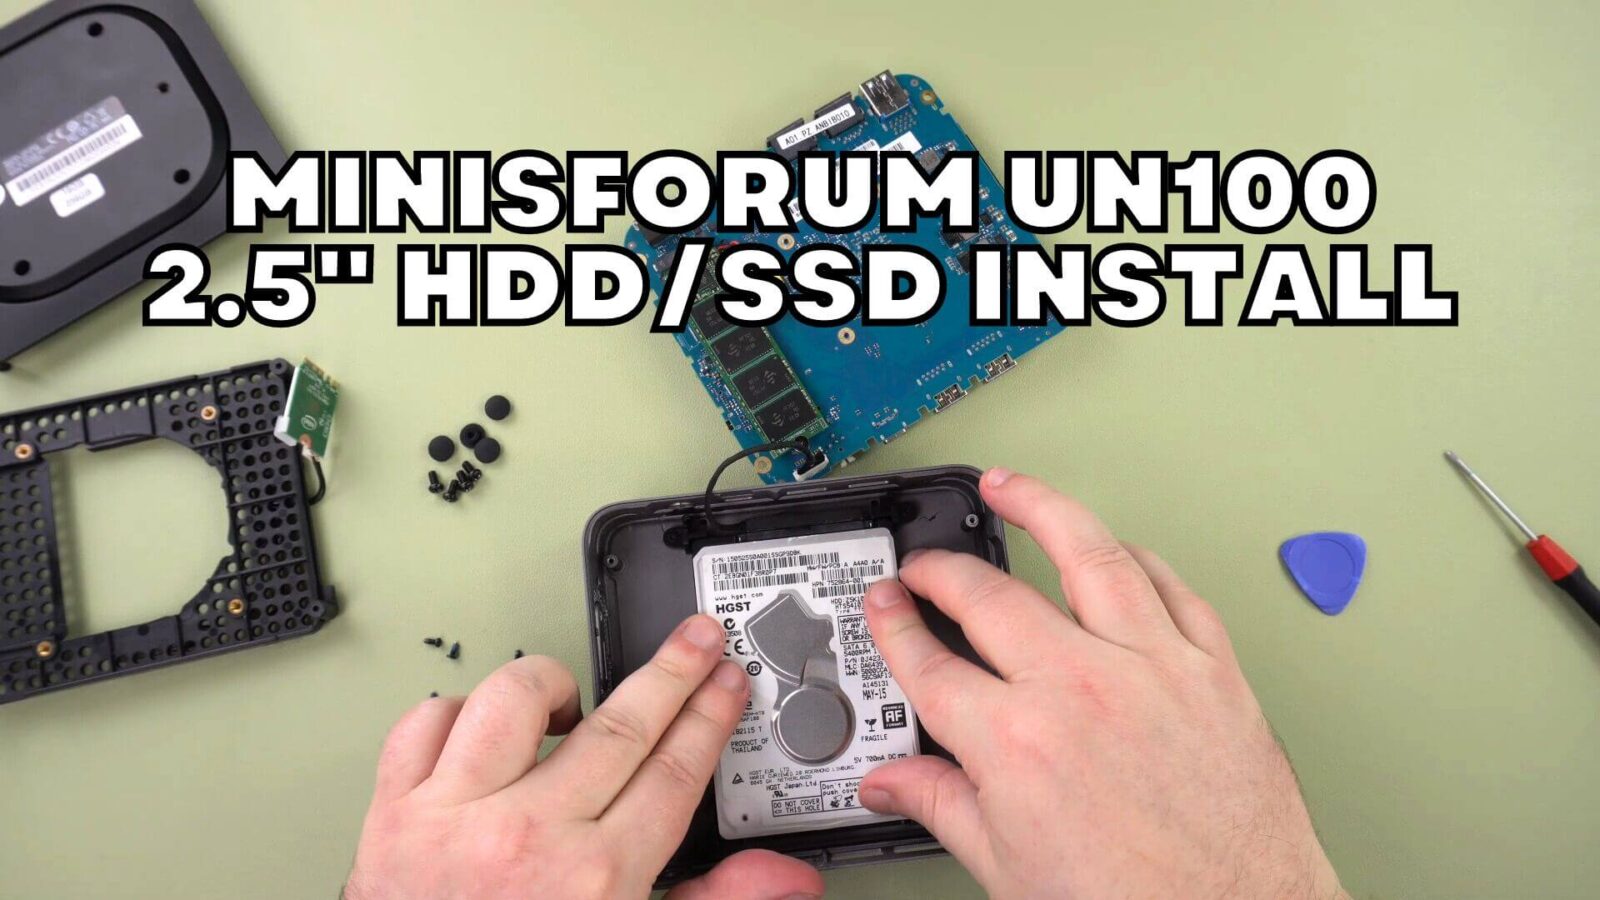 How to Install 2.5" HDD/SSD on a  Minisforum UN100